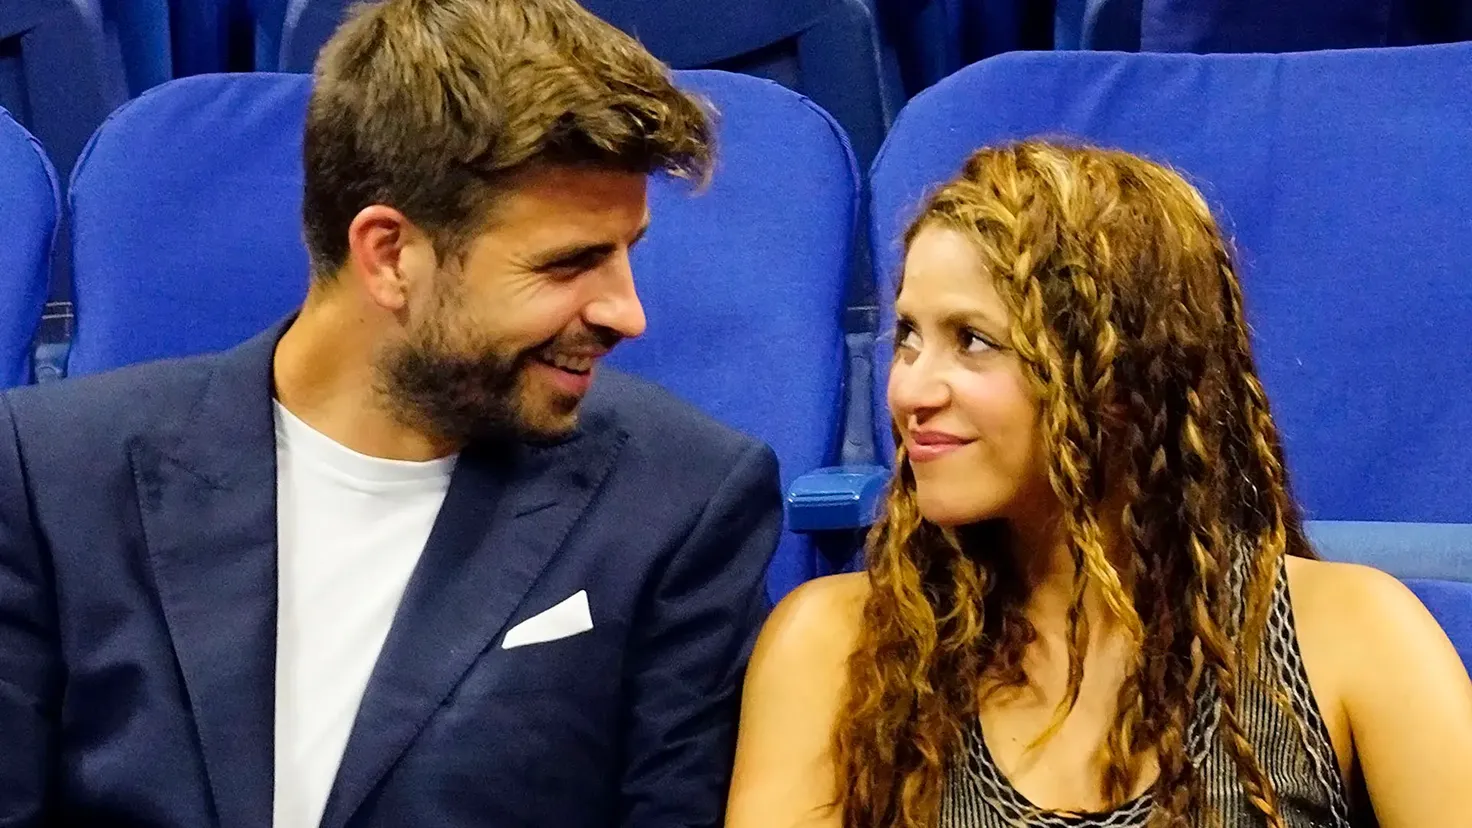 Shakira resumes contact with Piqu amid rumors of a new love: They talk to each other
